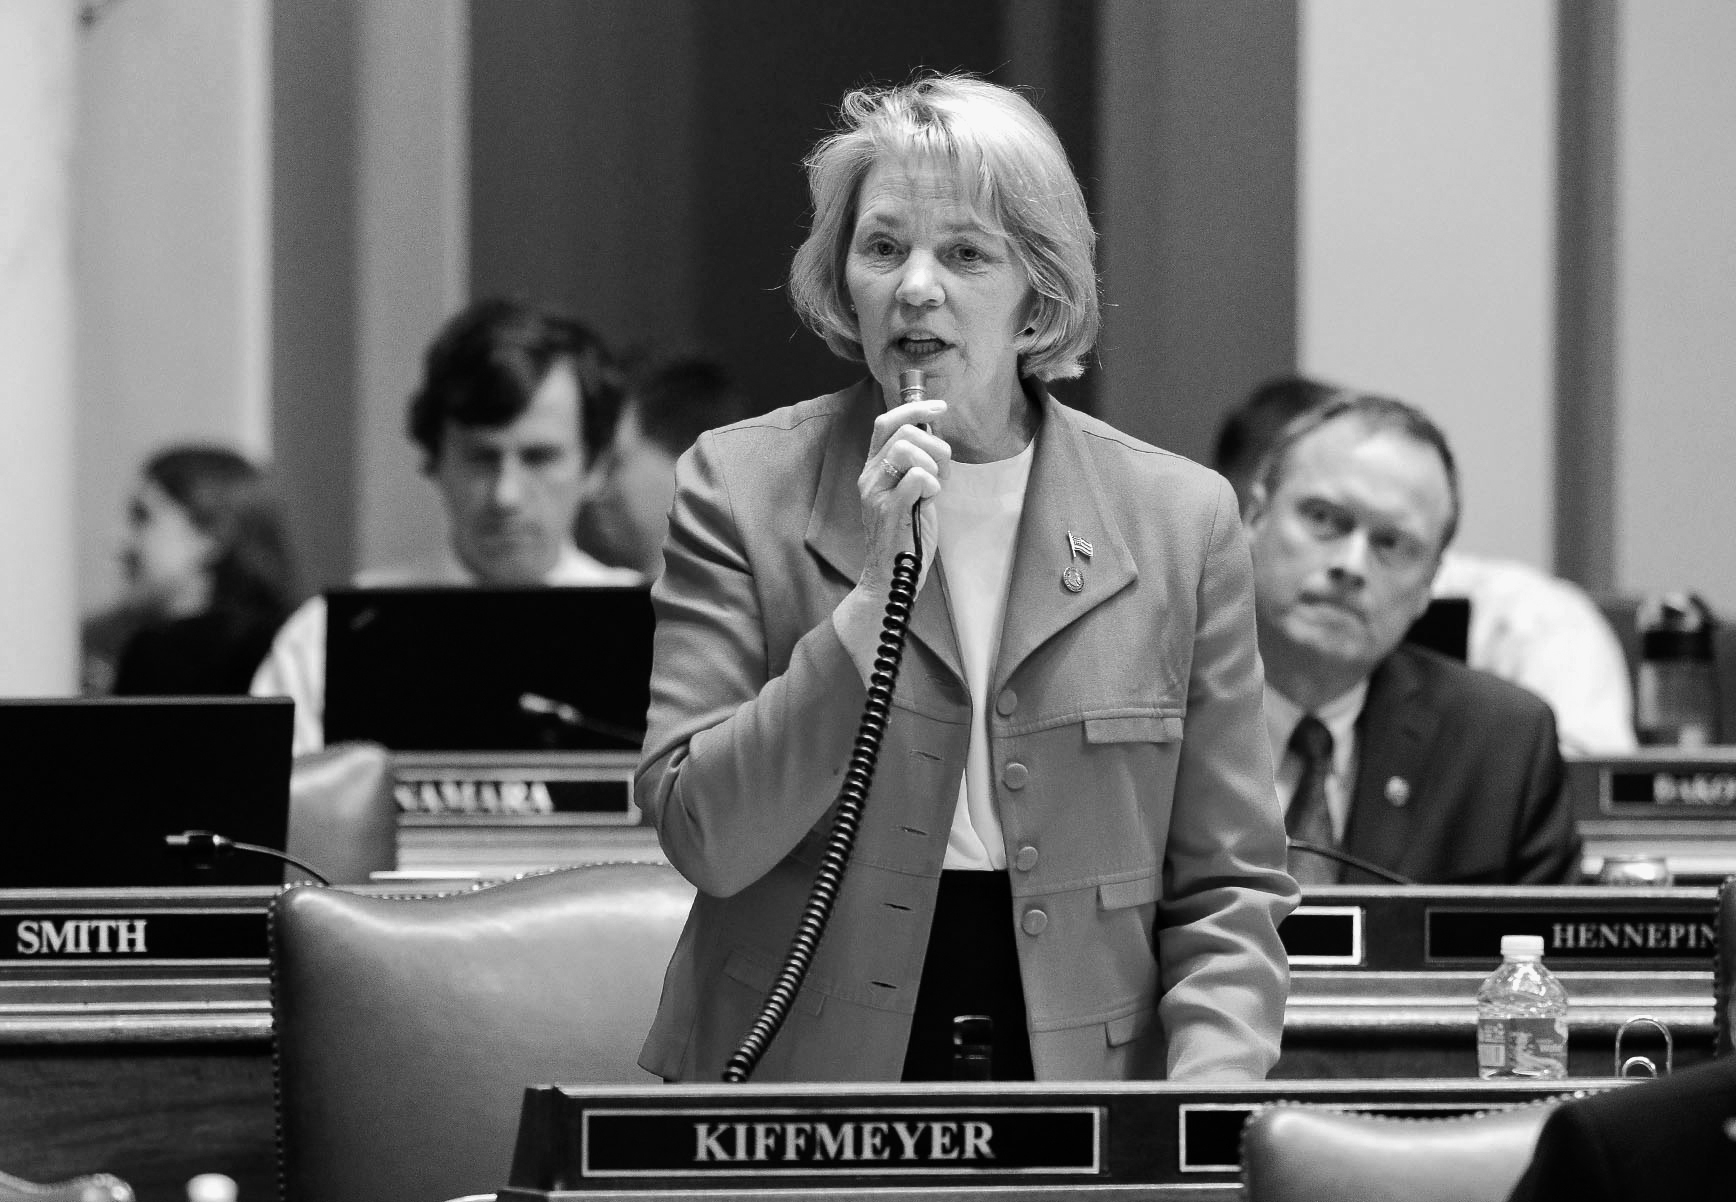 Rep. Mary Kiffmeyer considers her style to be clear and methodical — bringing opposing sides together. (Photo by Andrew VonBank)